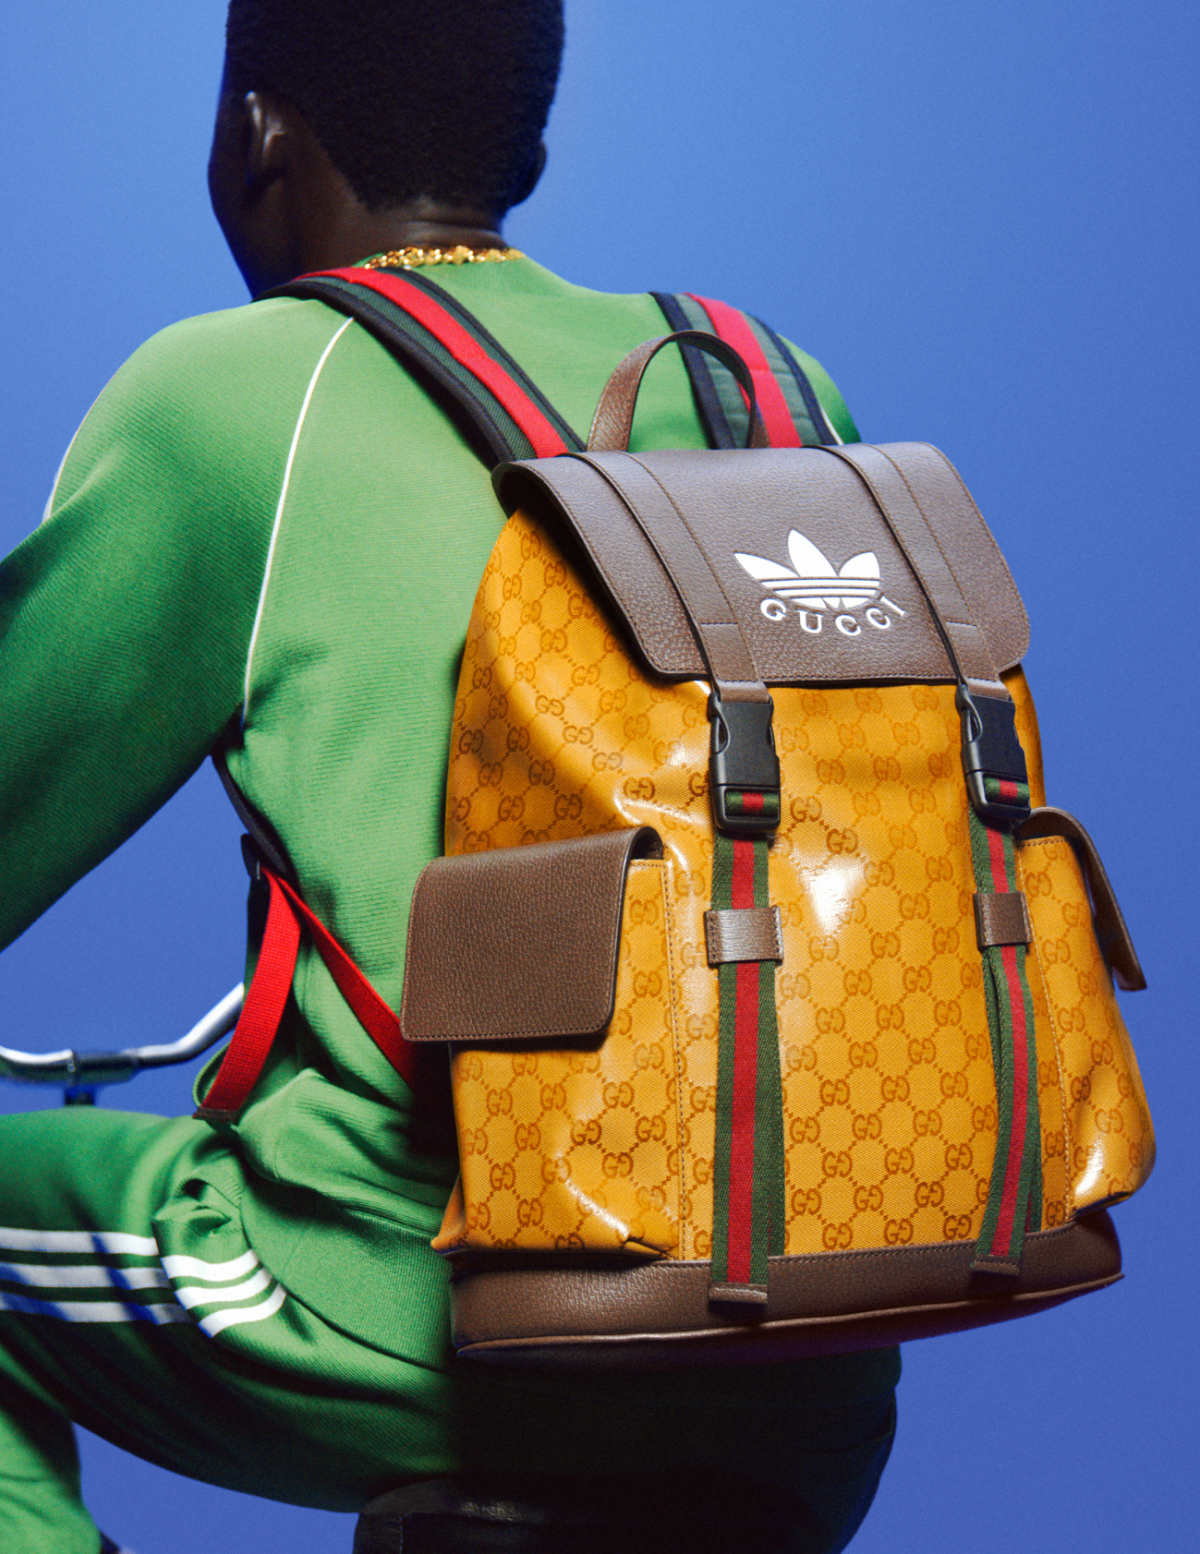 Adidas And Gucci Is Here